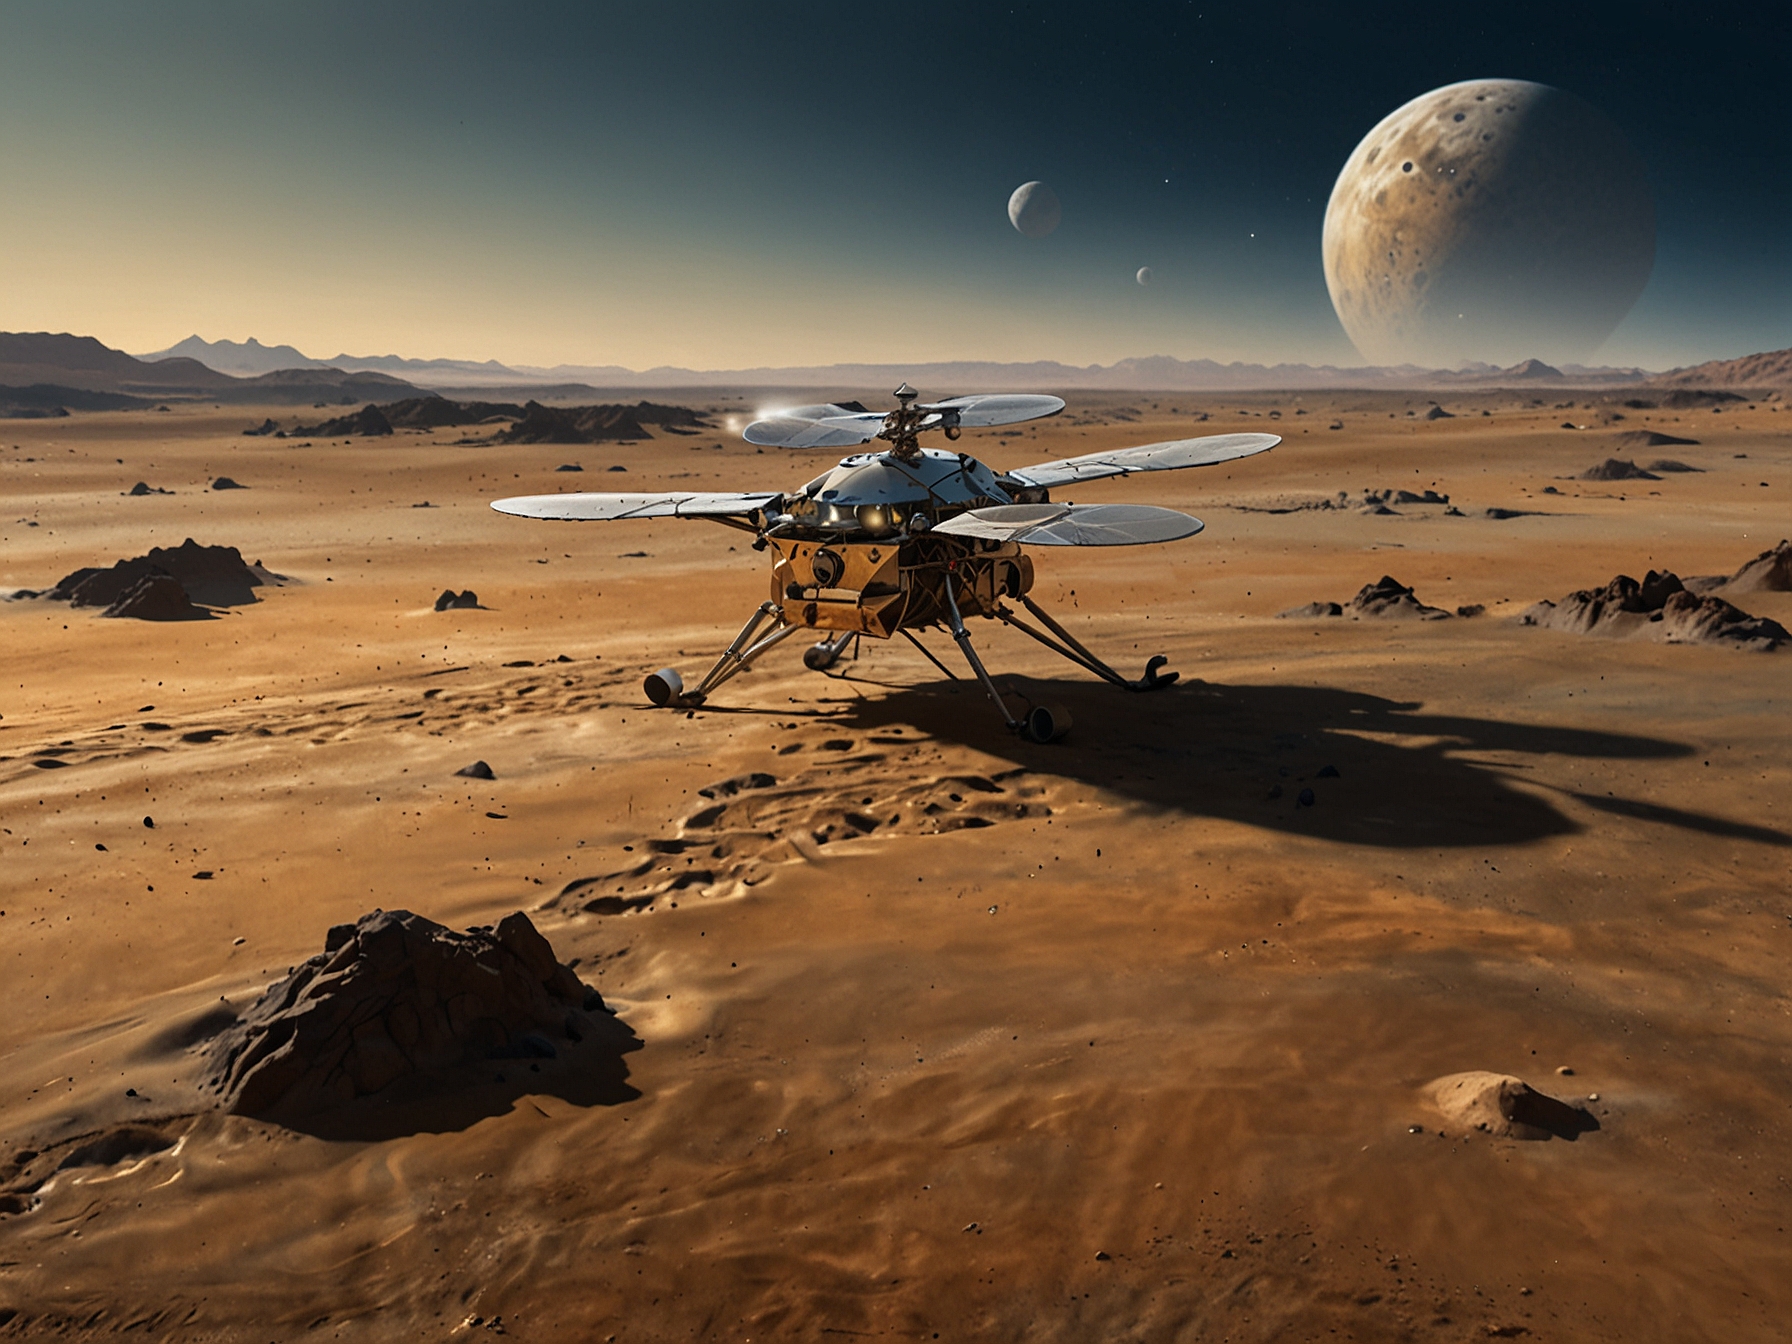 A depiction of NASA's Dragonfly rotorcraft lander exploring Titan's lakeshores, dunes, and craters, analyzing sediment transport and organic chemical interactions influenced by wave activity.